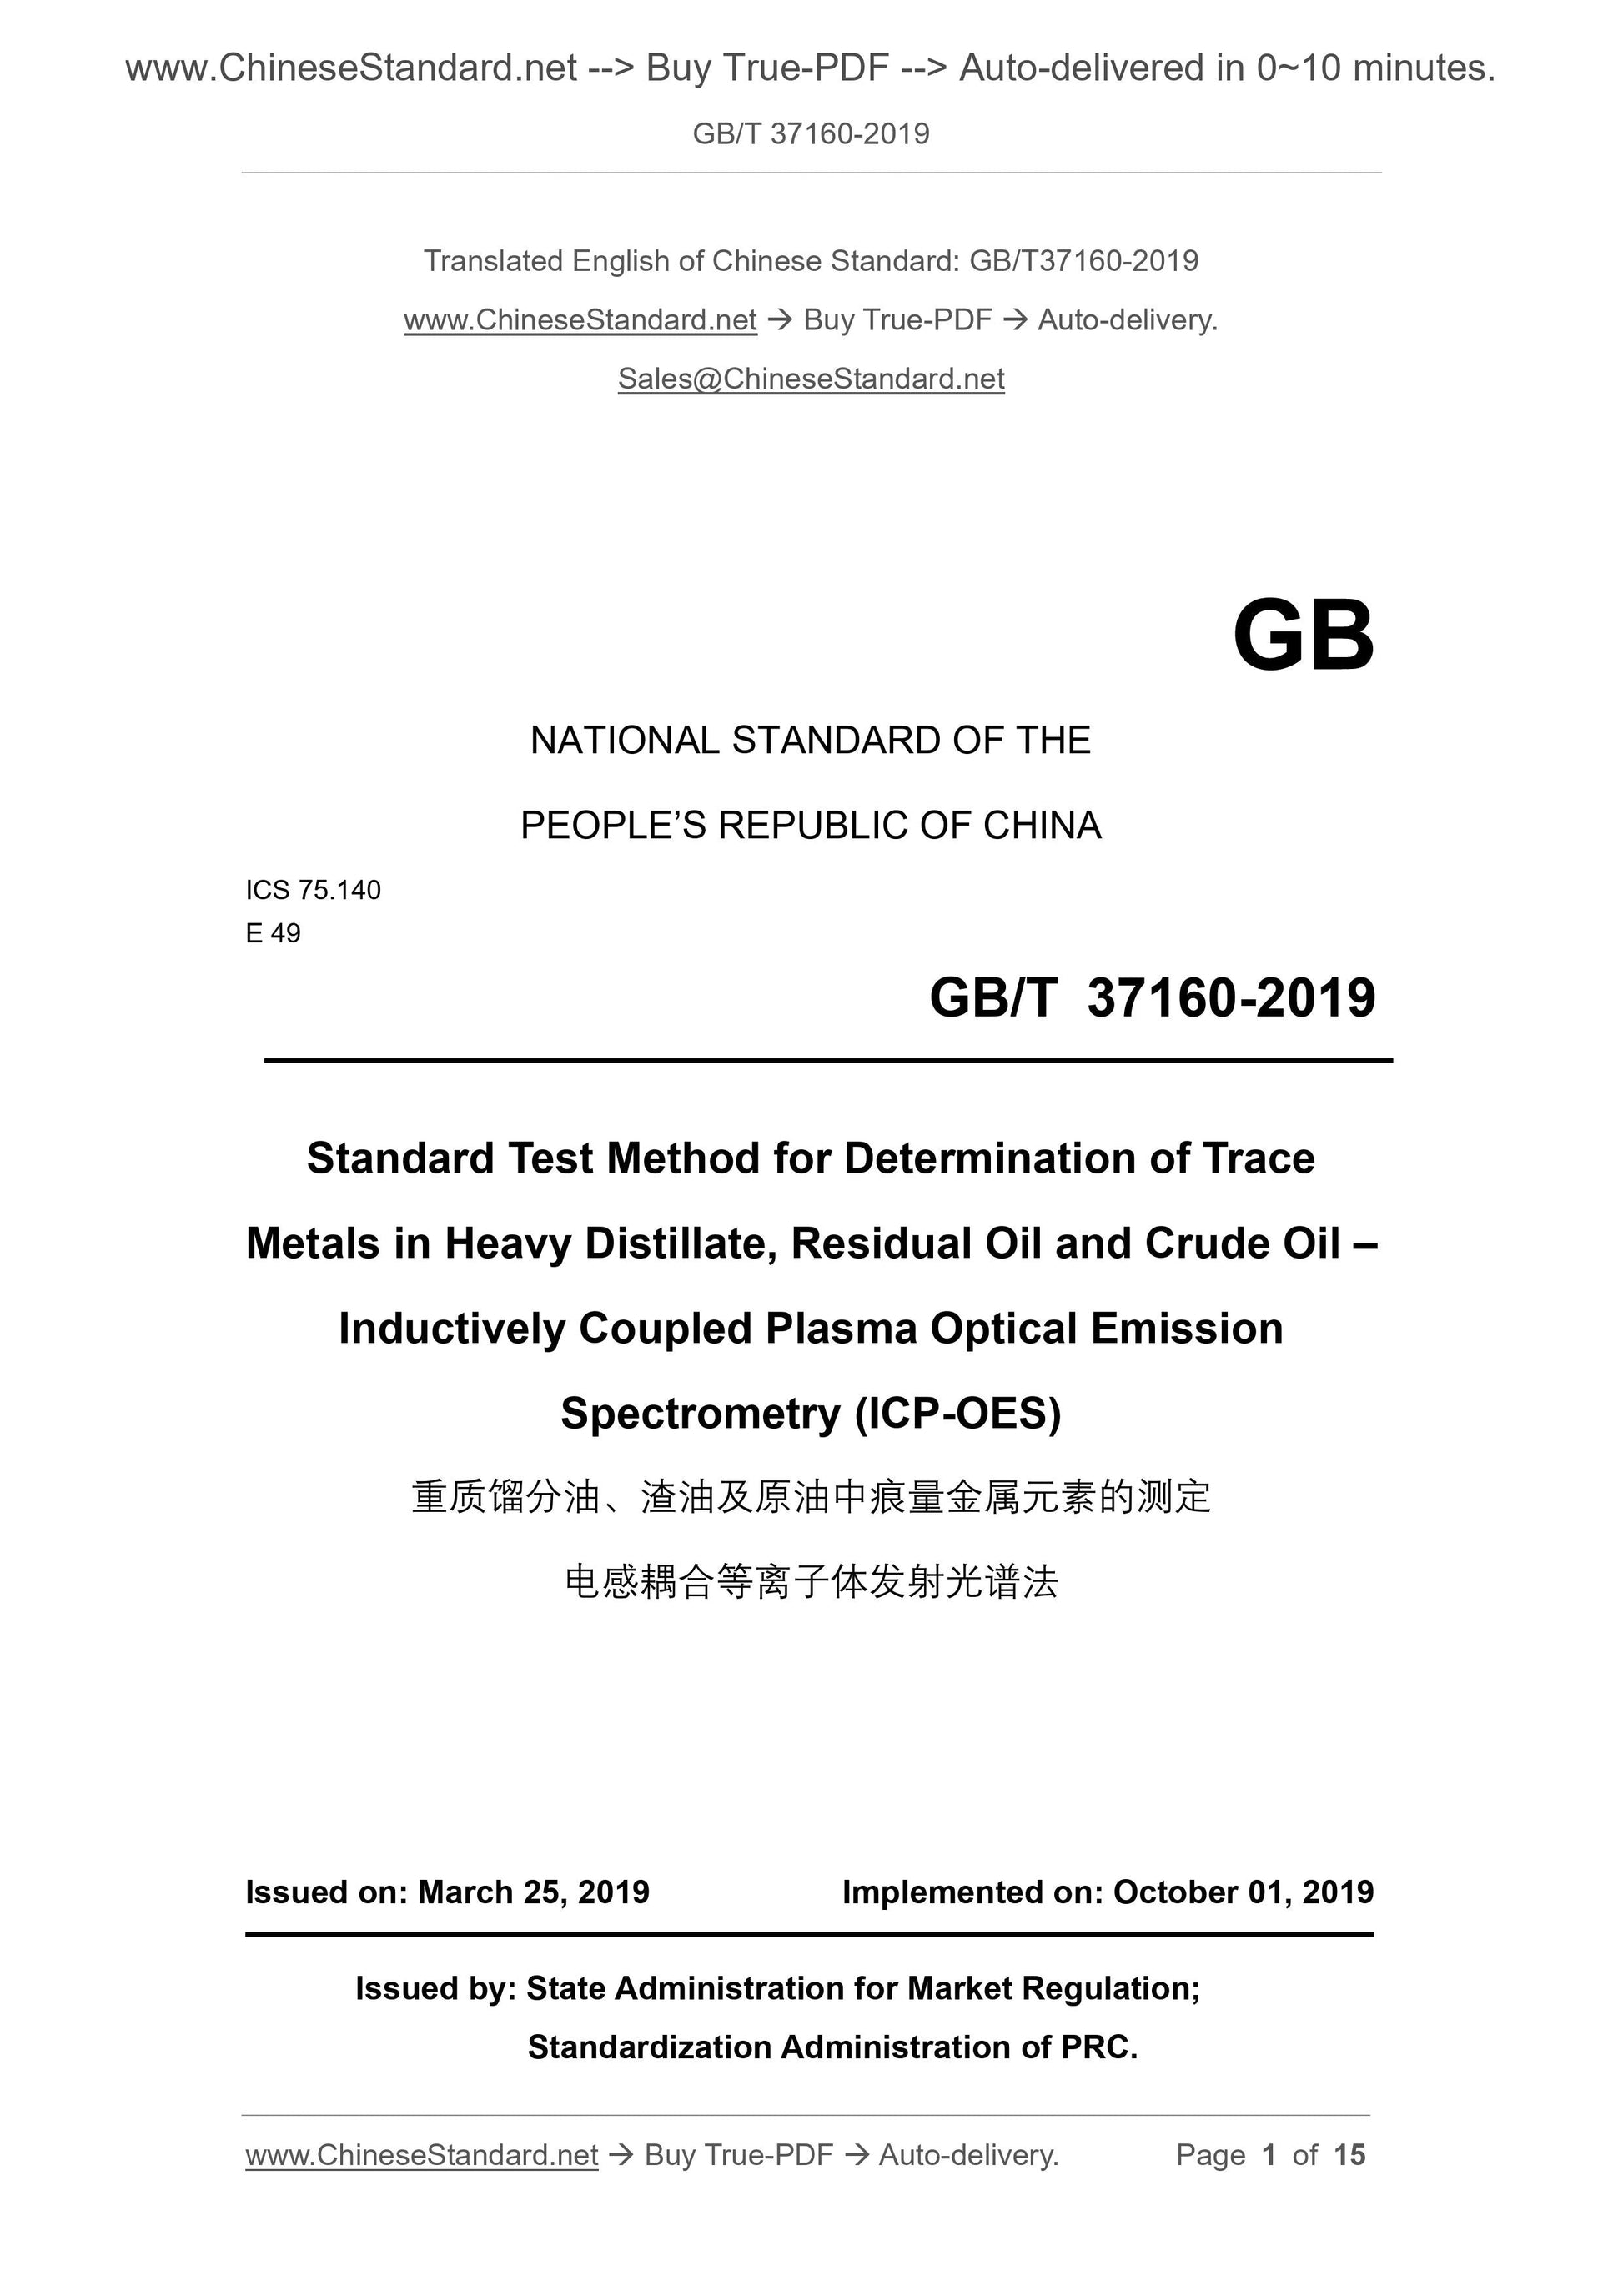 GB/T 37160-2019 Page 1